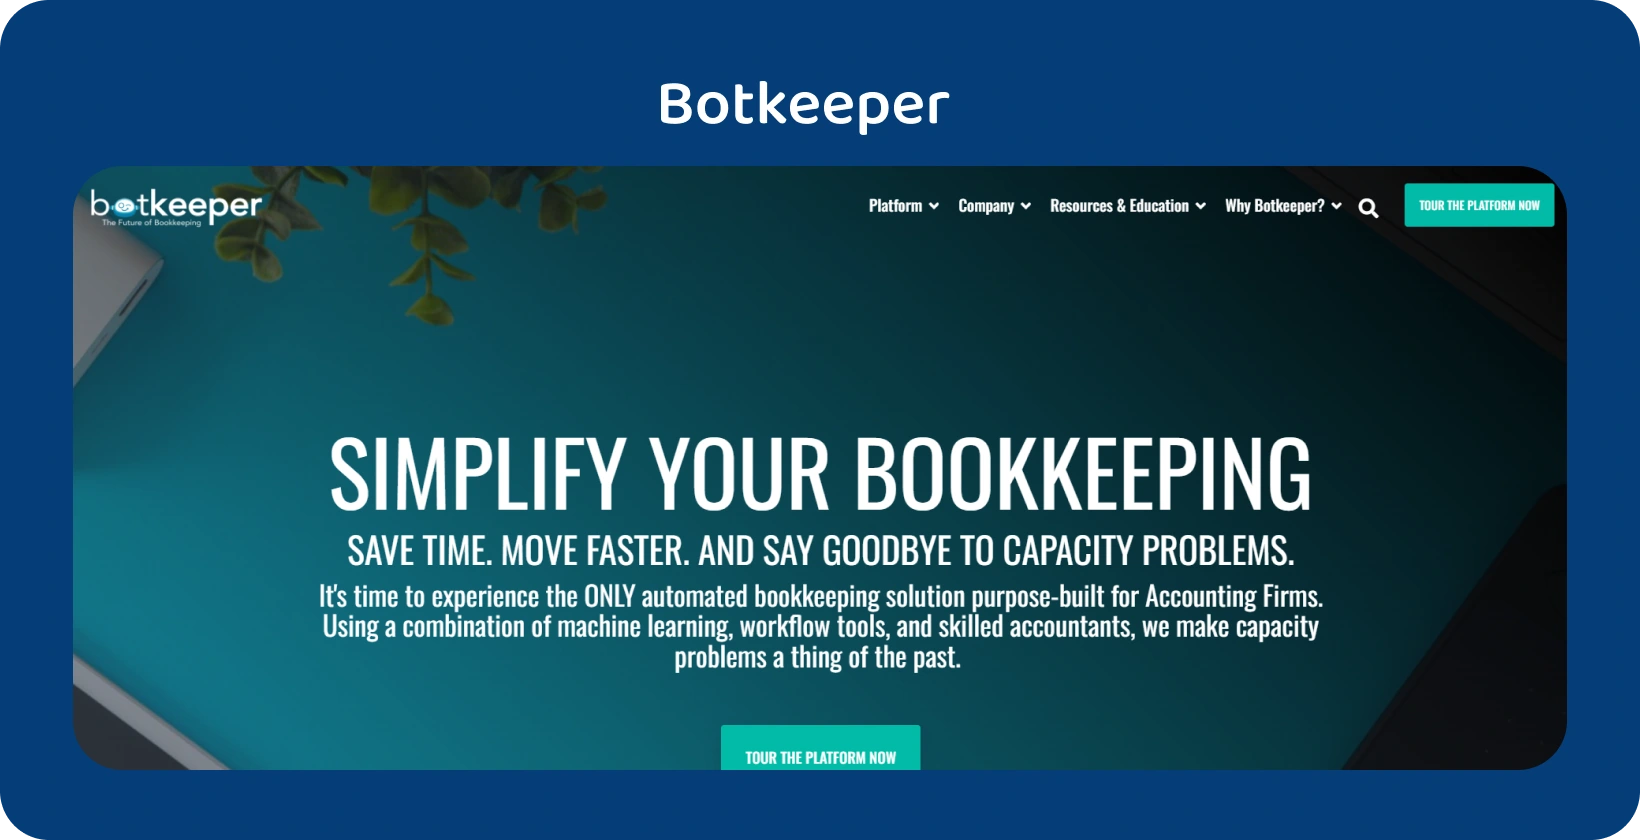 Botkeeper's homepage highlights the simplification of bookkeeping for accountants via its automation technology.